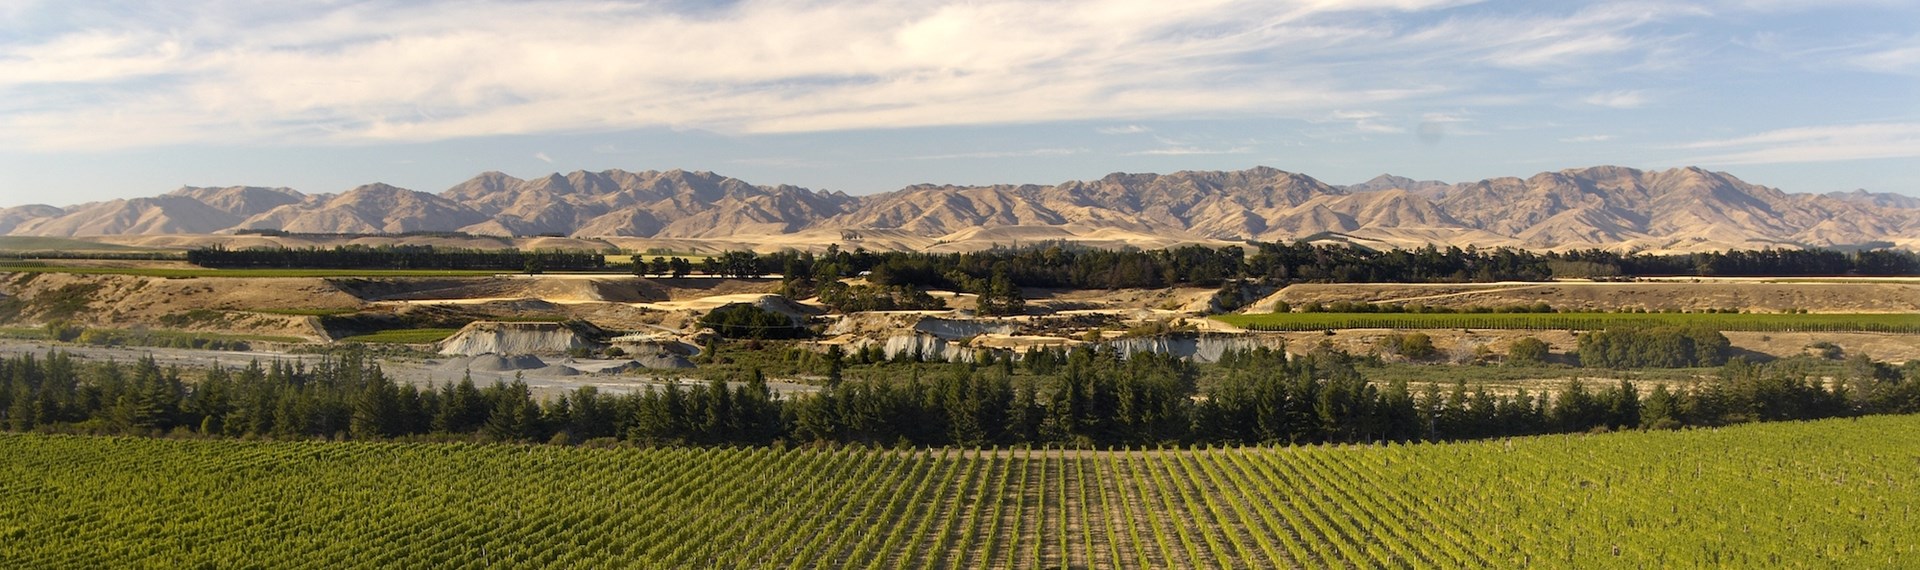 Marlborough's picturesque vineyards with the hills bordering the background, near Blenheim in Marlborough at the top of New Zealand's South Island.